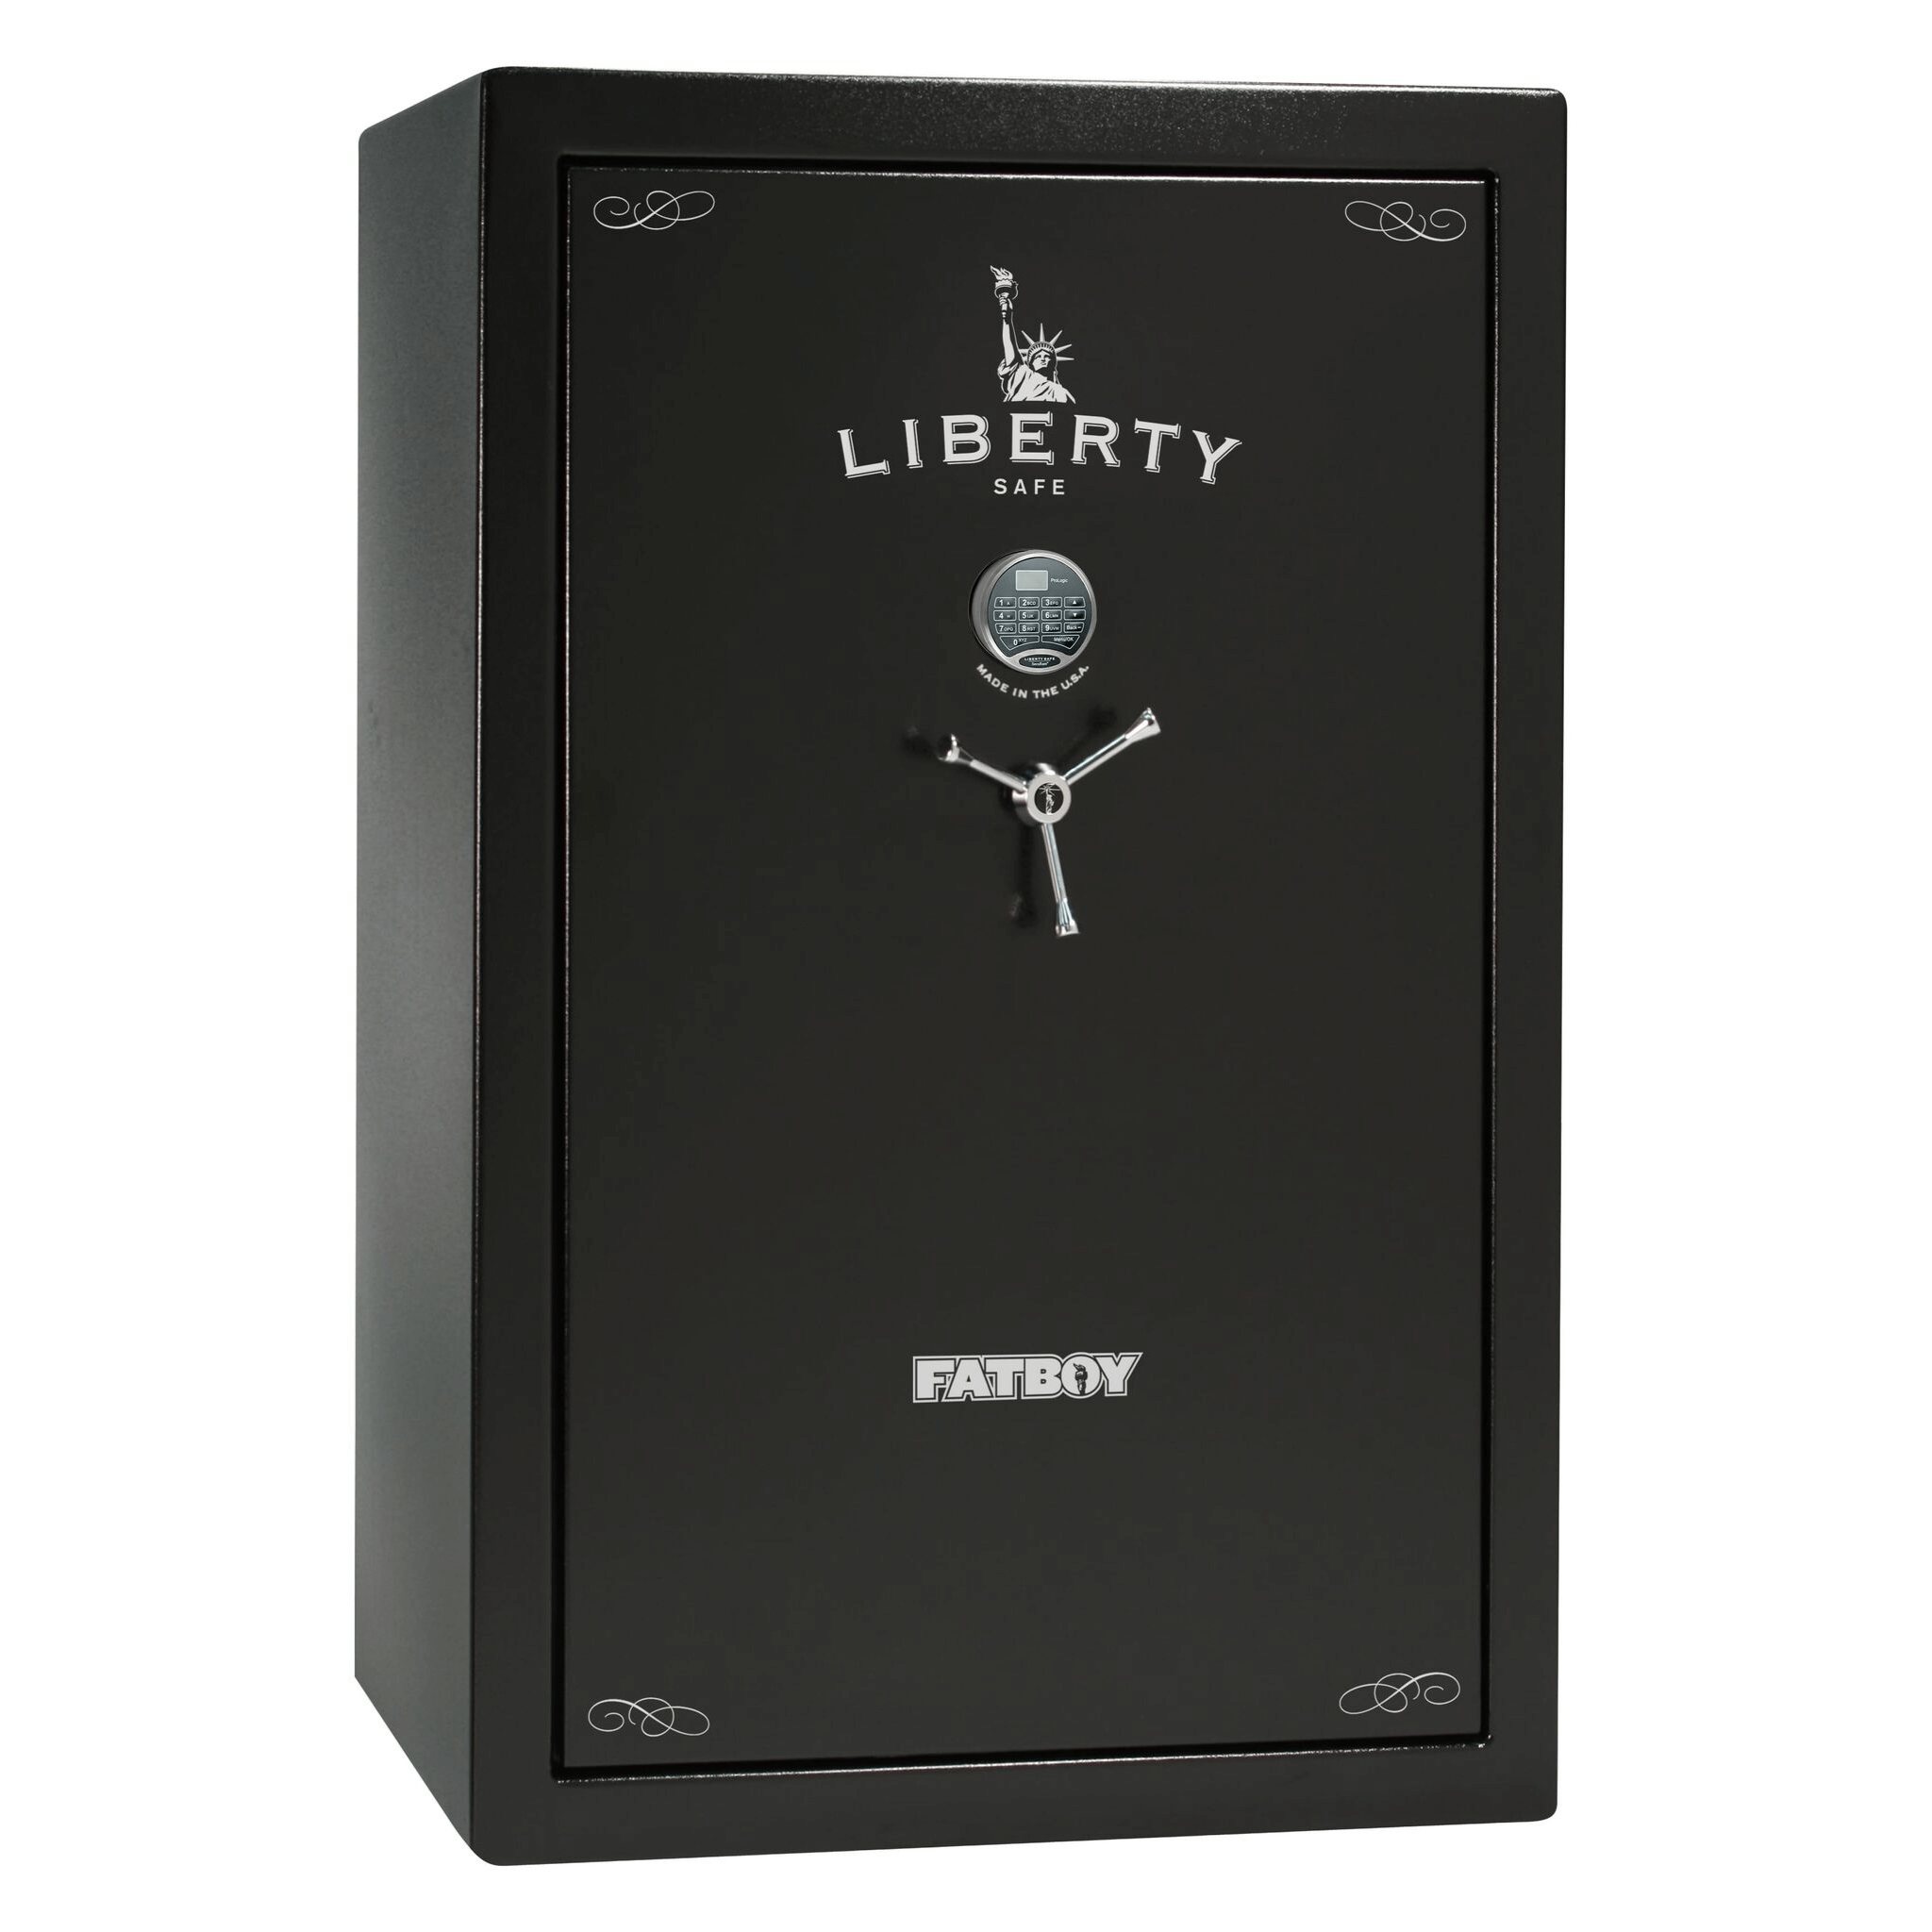 Fatboy Series | Level 4 Security | 90 Minute Fire Protection | 64 | Dimensions: 60.5"(H) x 42"(W) x 32"(D) | Black Textured | Mechanical Lock